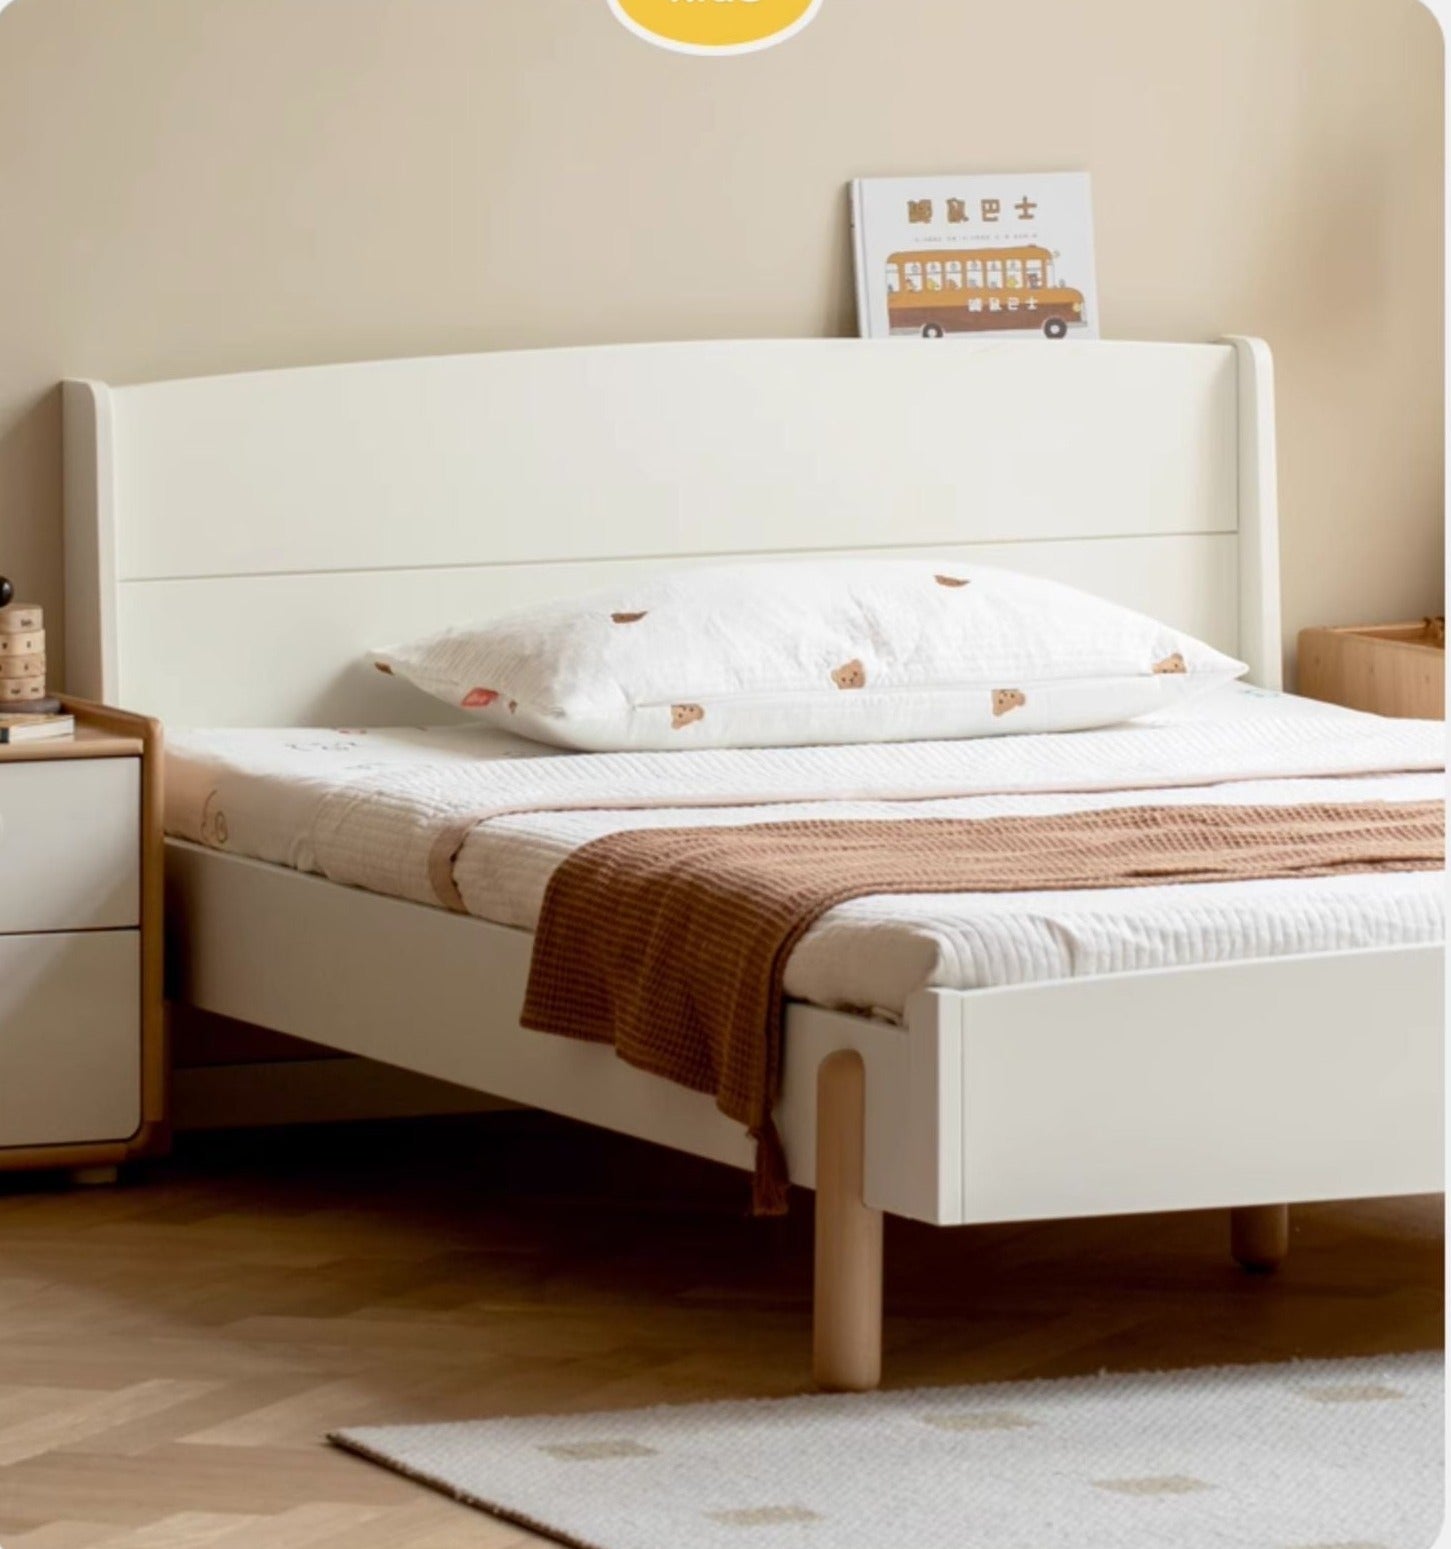 Poplar Solid wood bed for boy and girl"